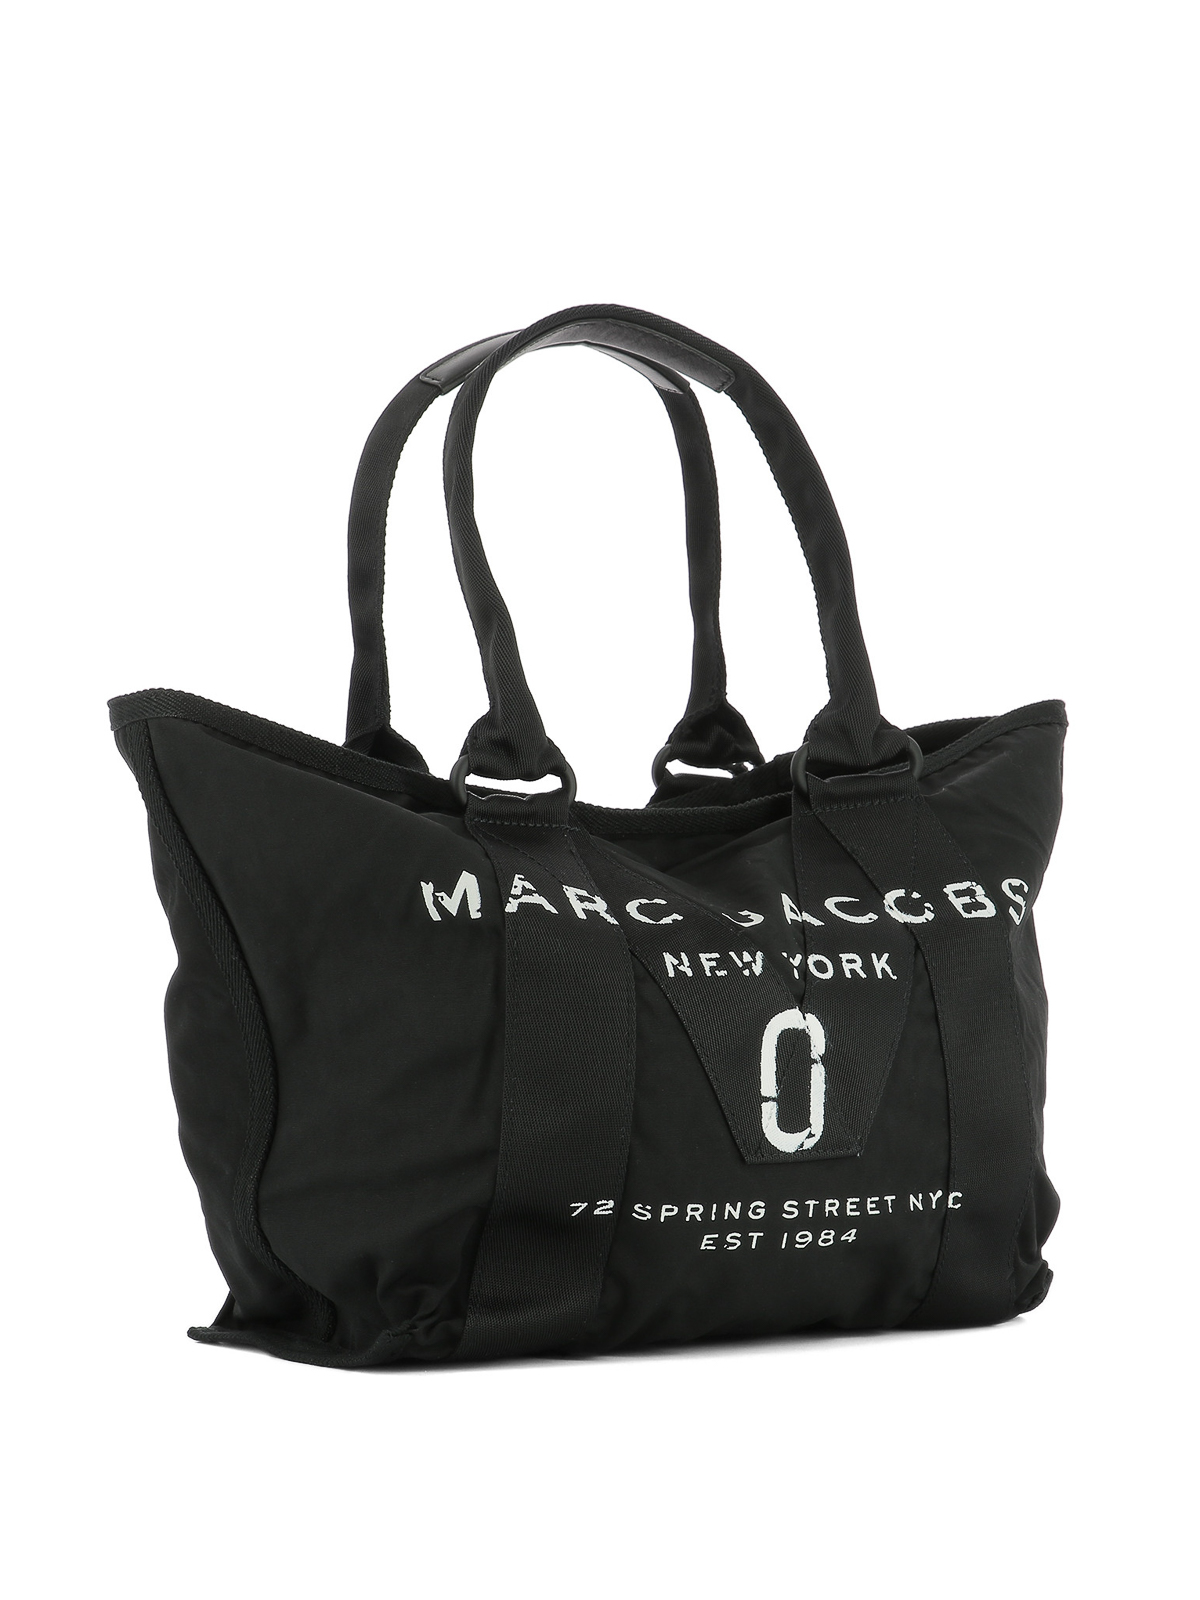 New Logo tote by Marc Jacobs - totes bags | iKRIX